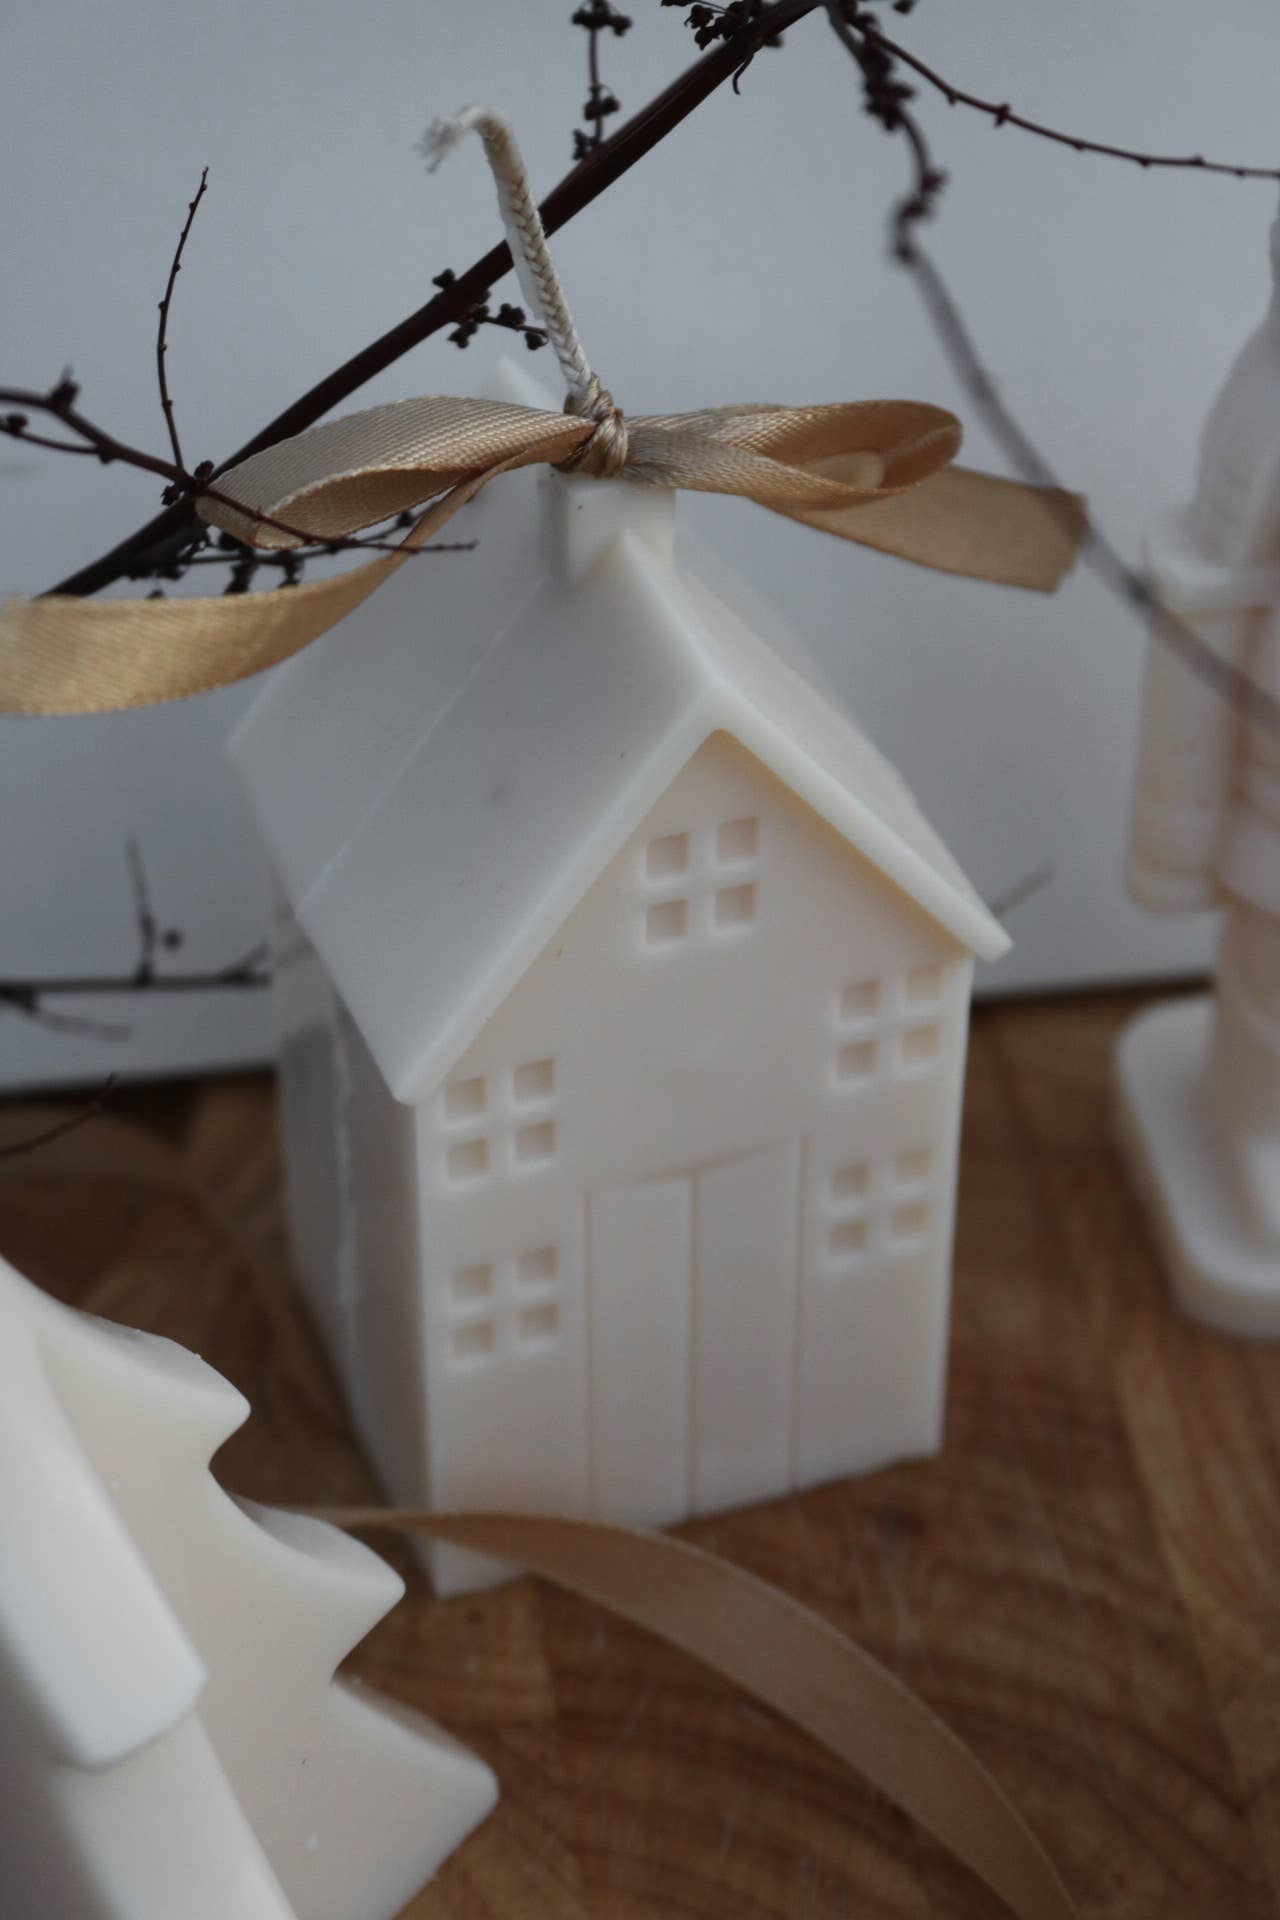 Cosy house candle: Natural/white